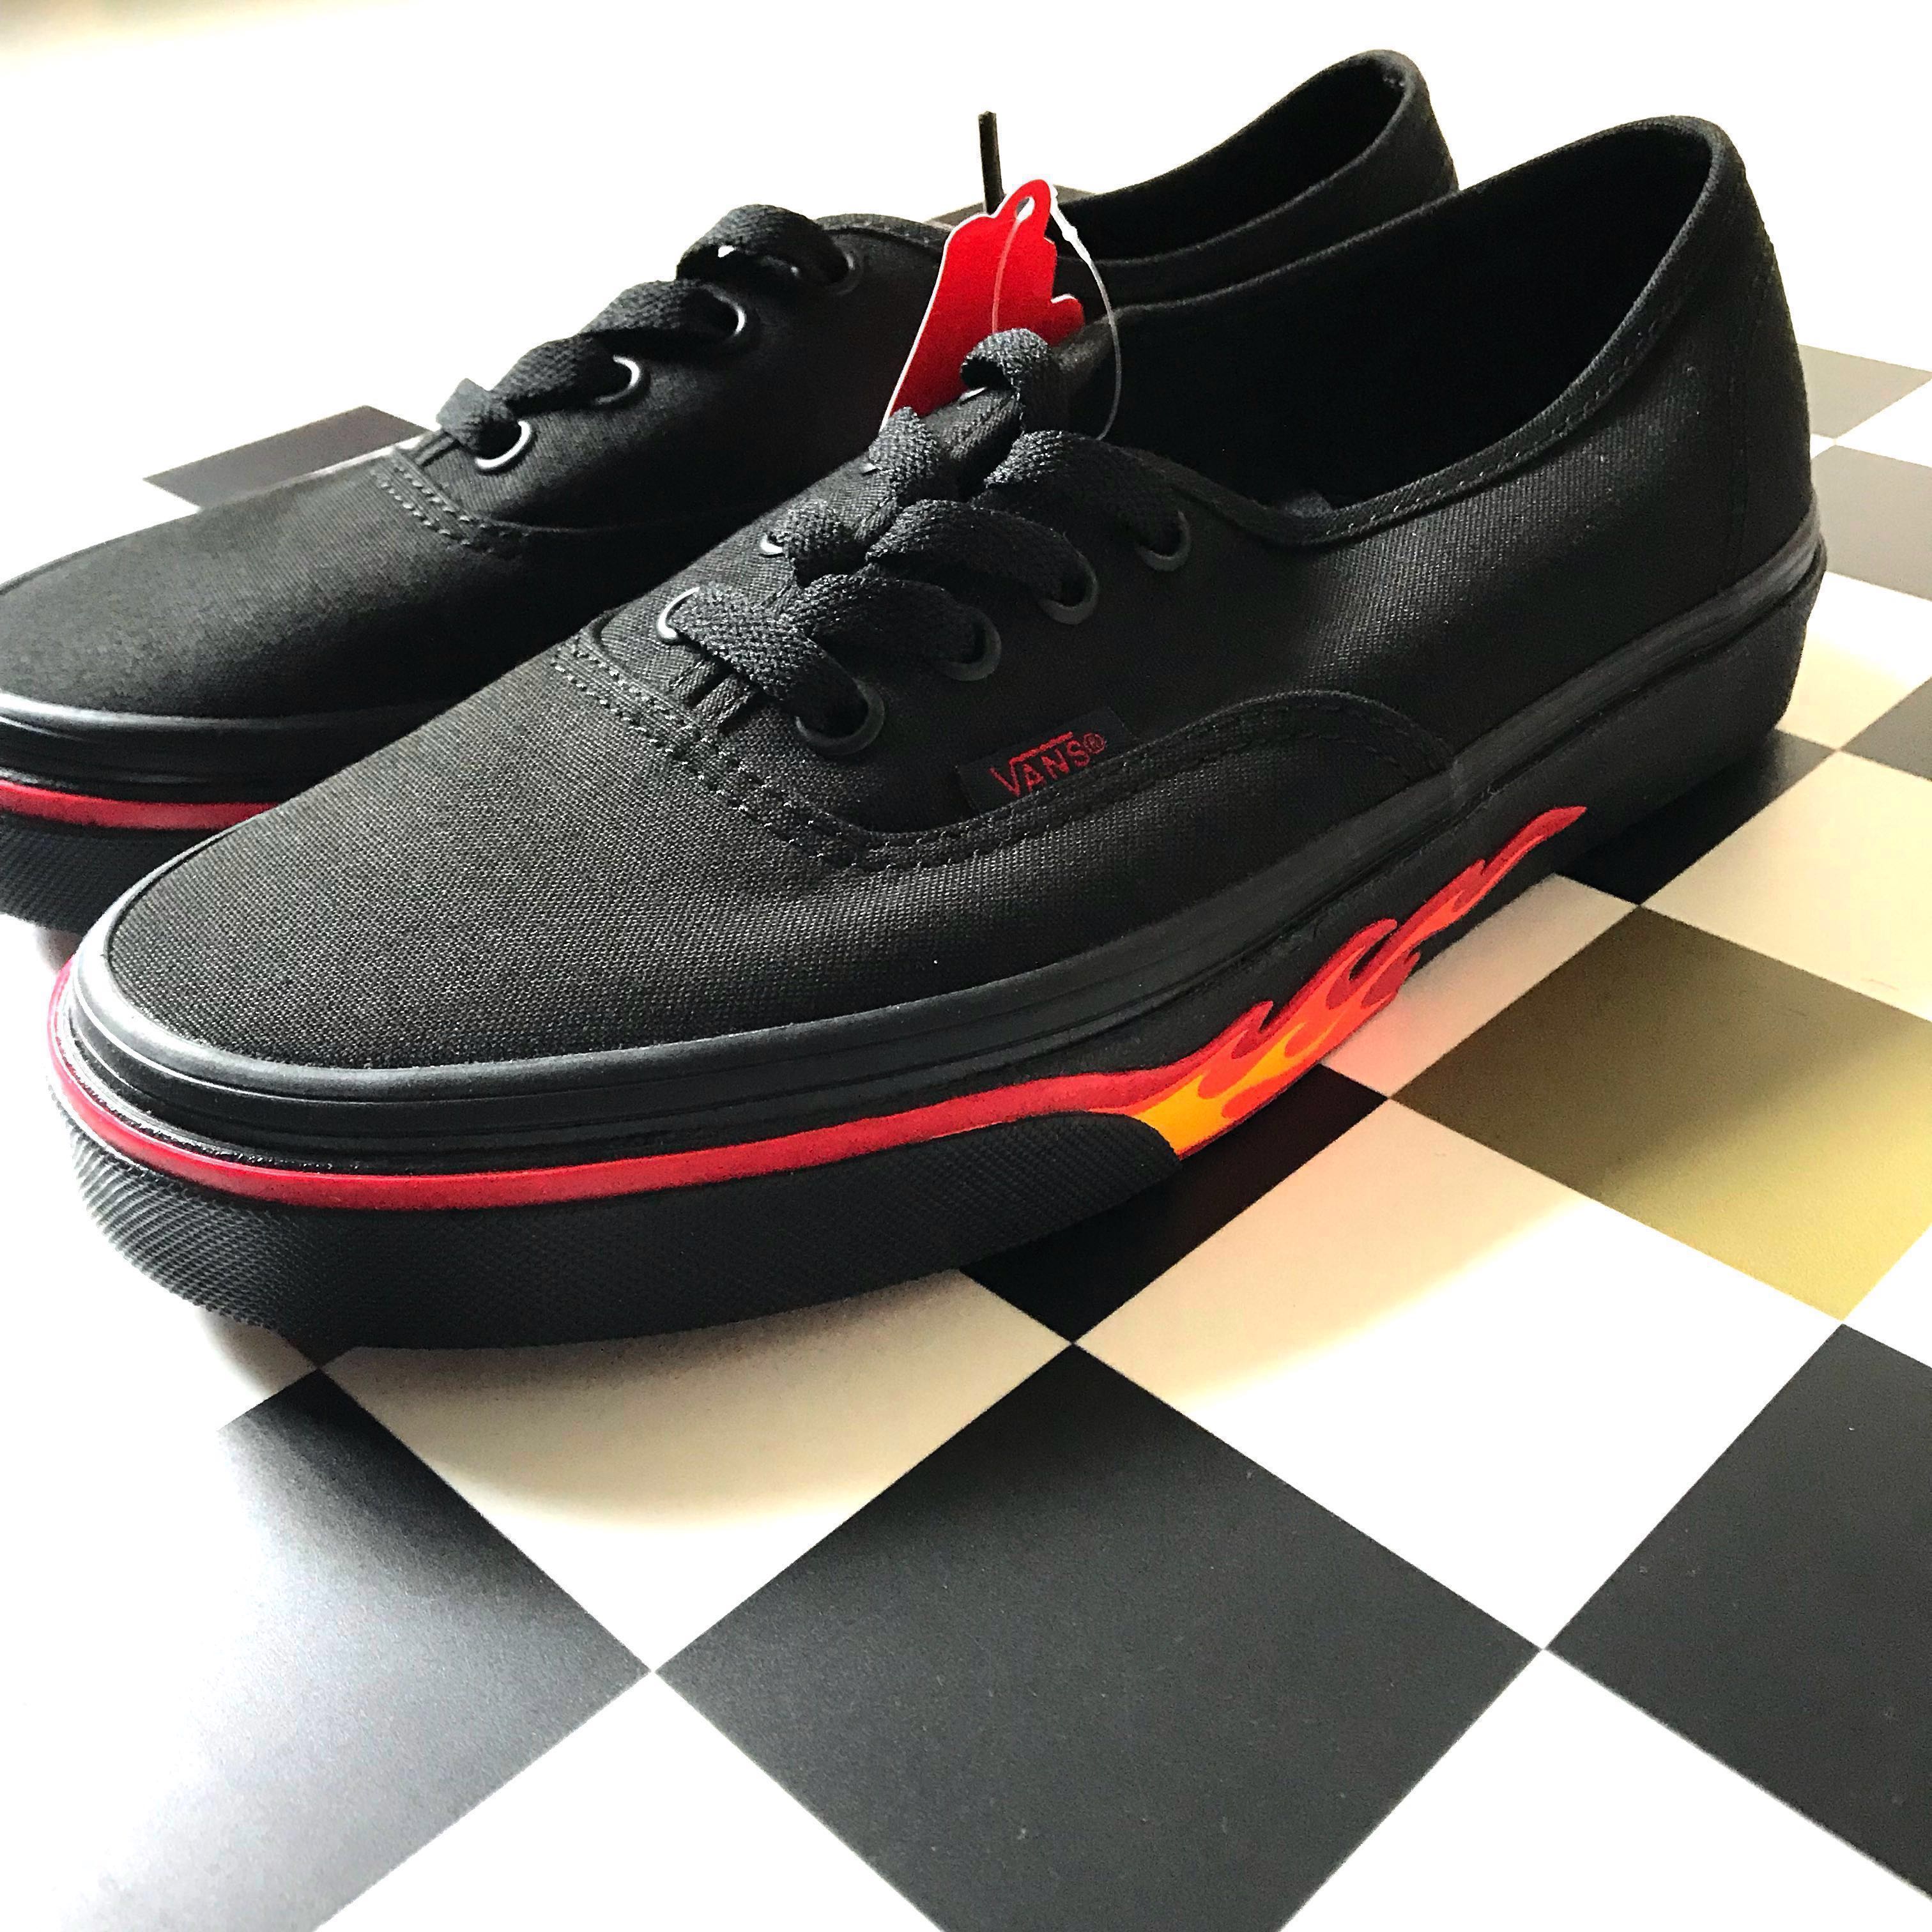 vans authentic flame wall